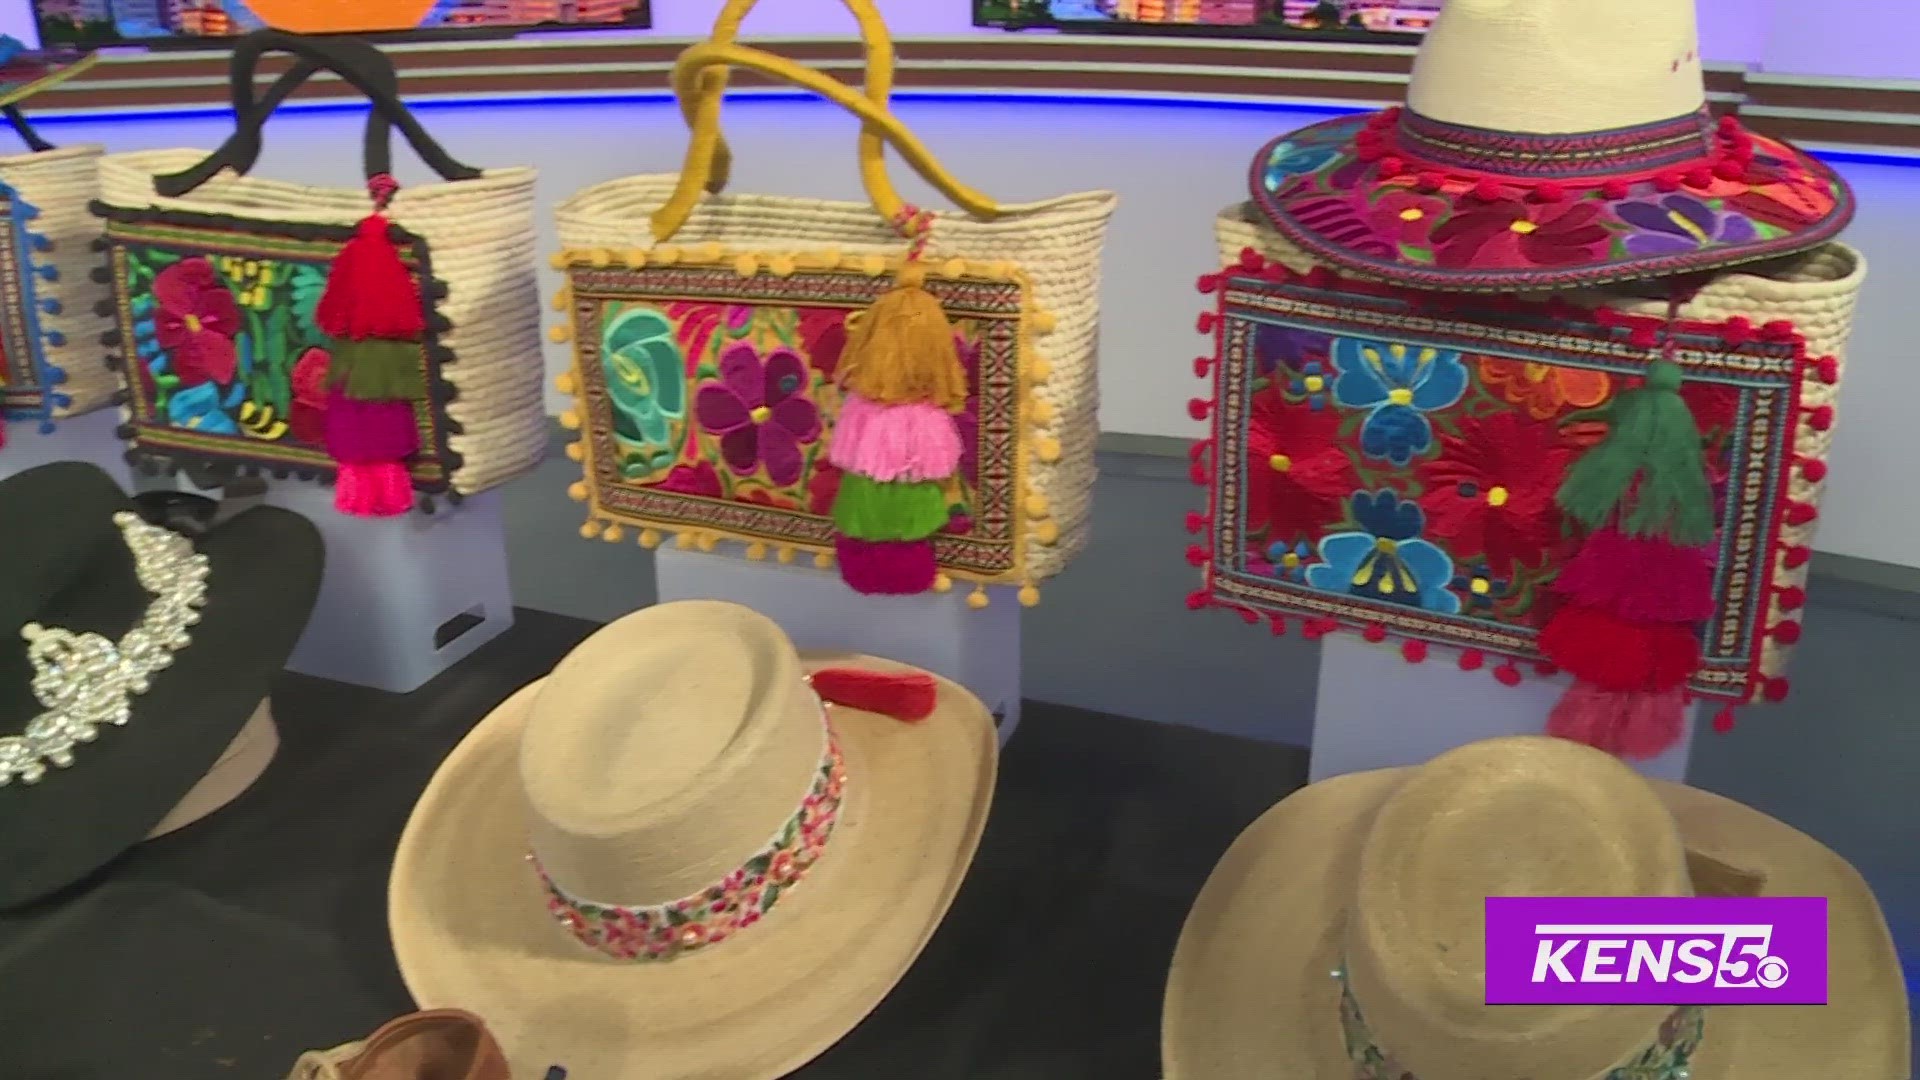 Maria Lopez with Indita Mia Artesanias shares her handmade products from Mexico.